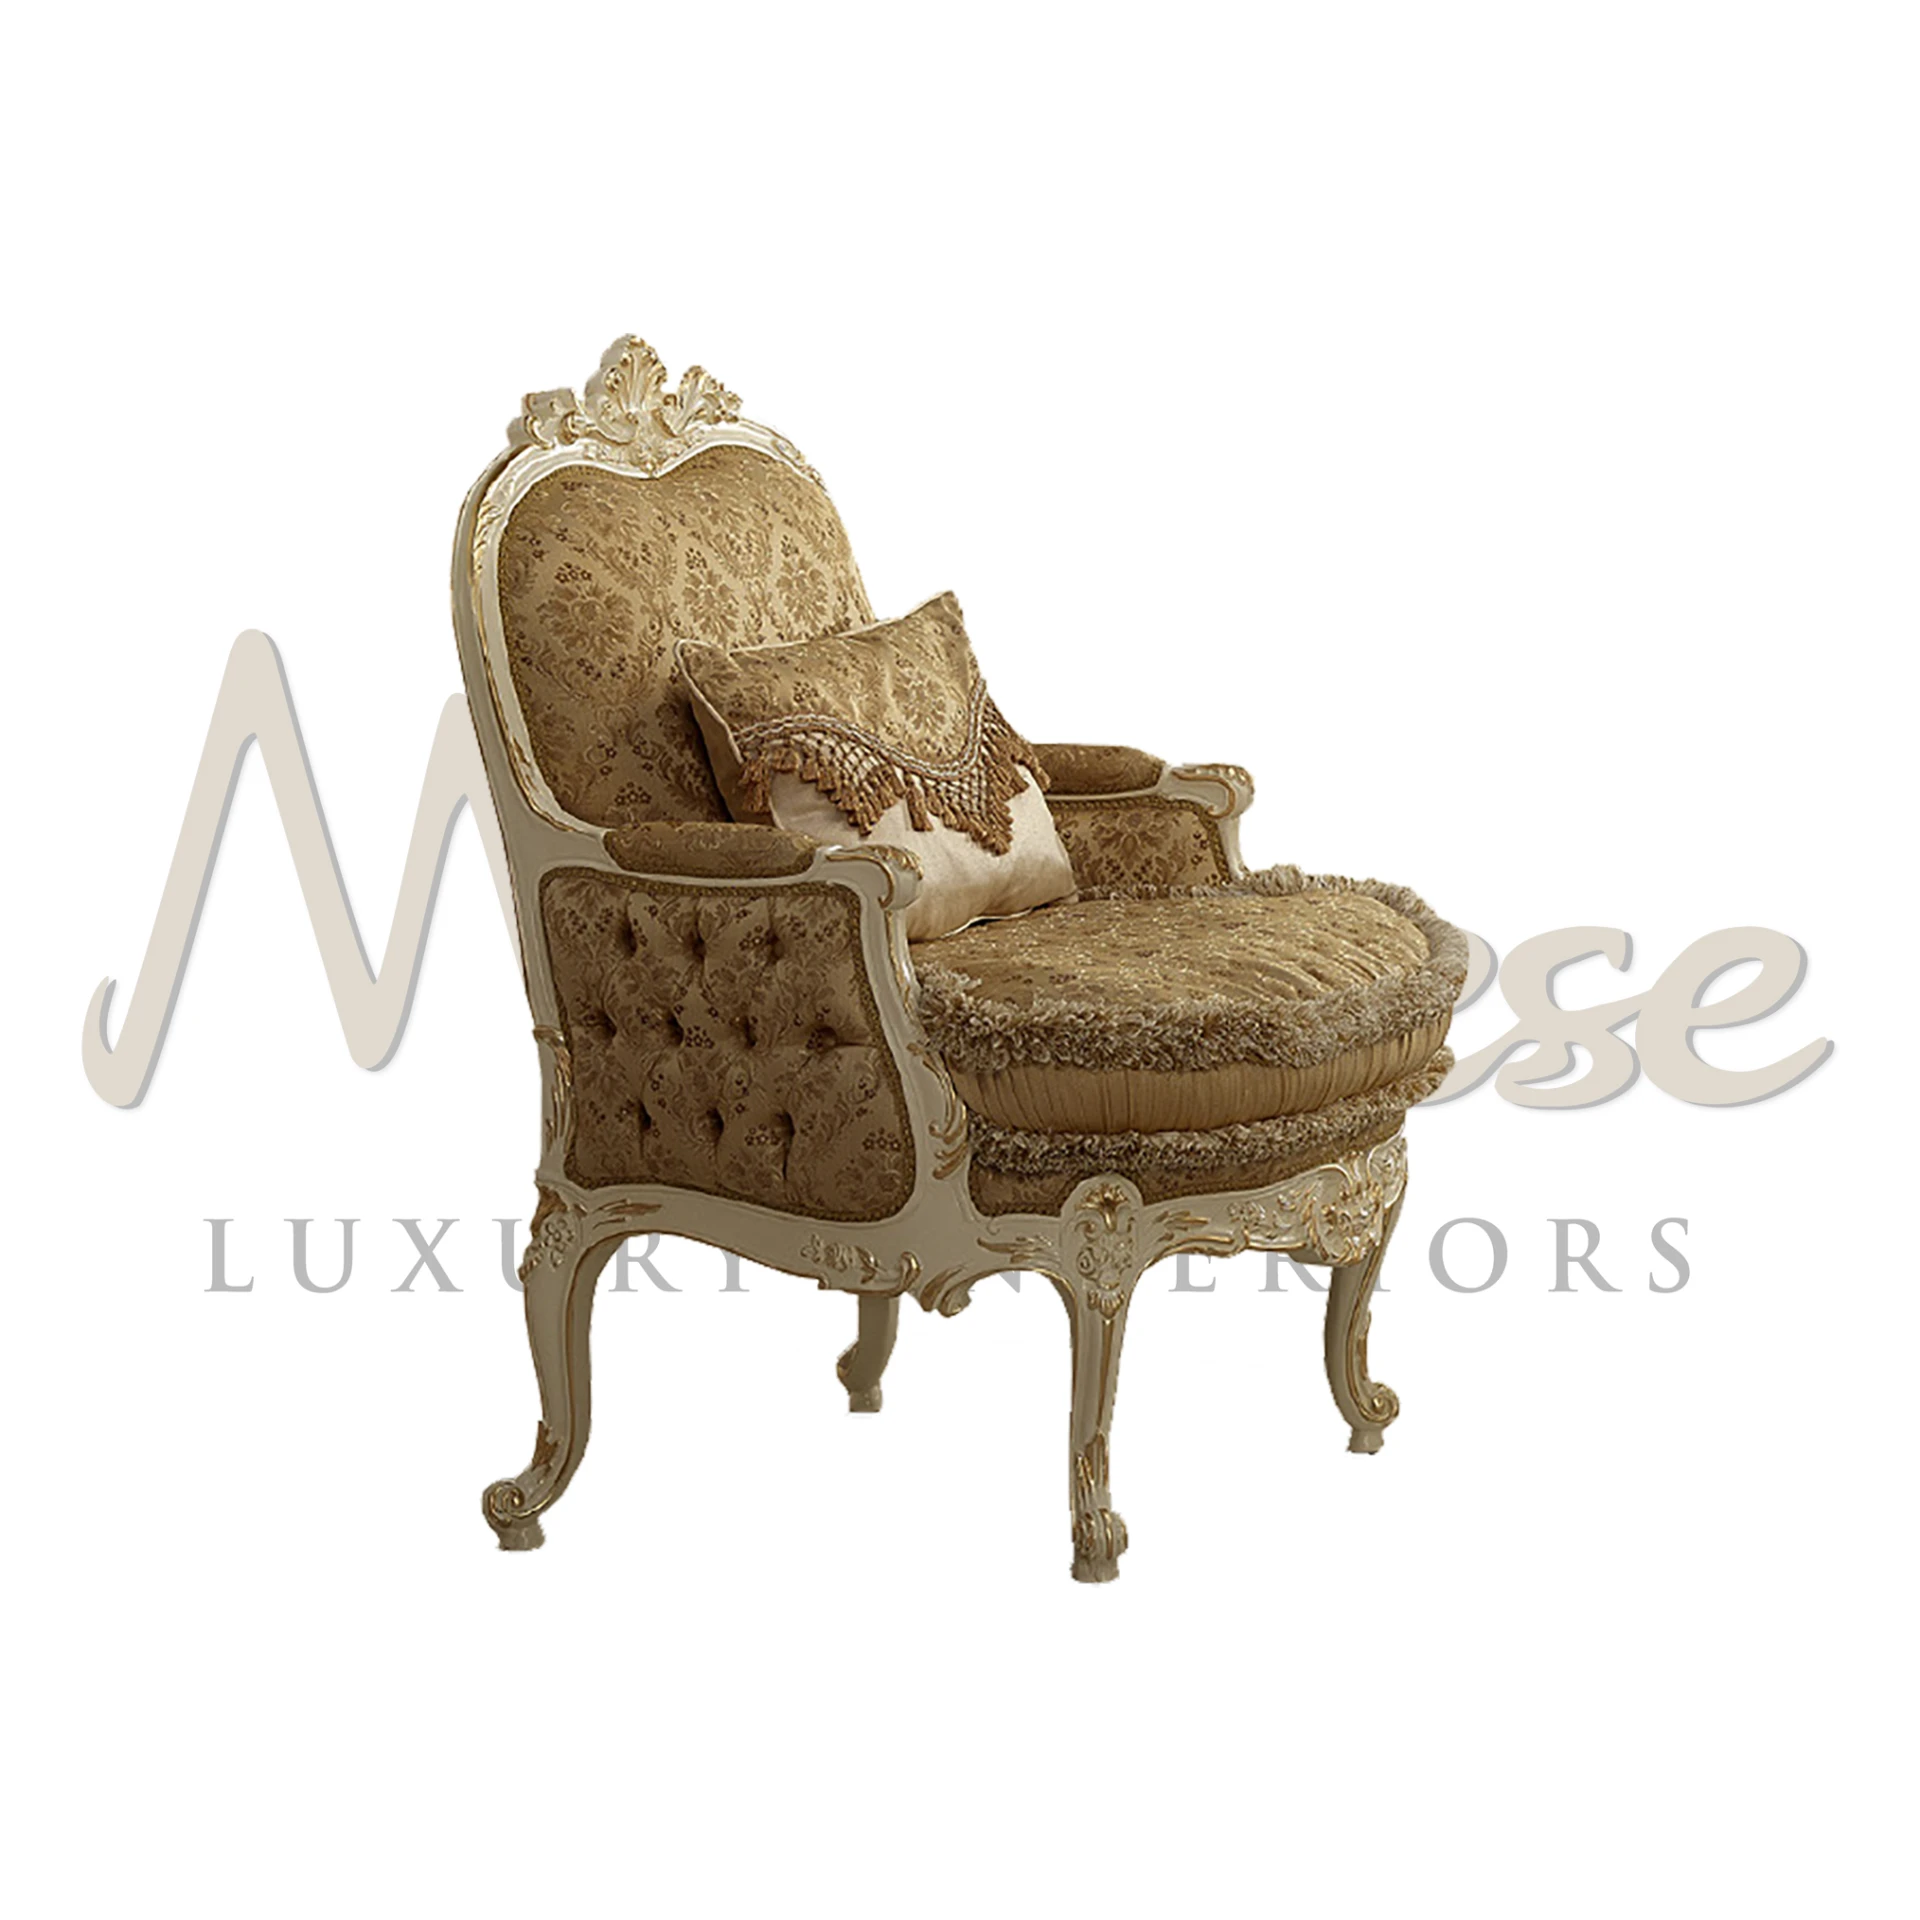 Luxurious Comfort: Elegant Bergere Armchair for Refined Living